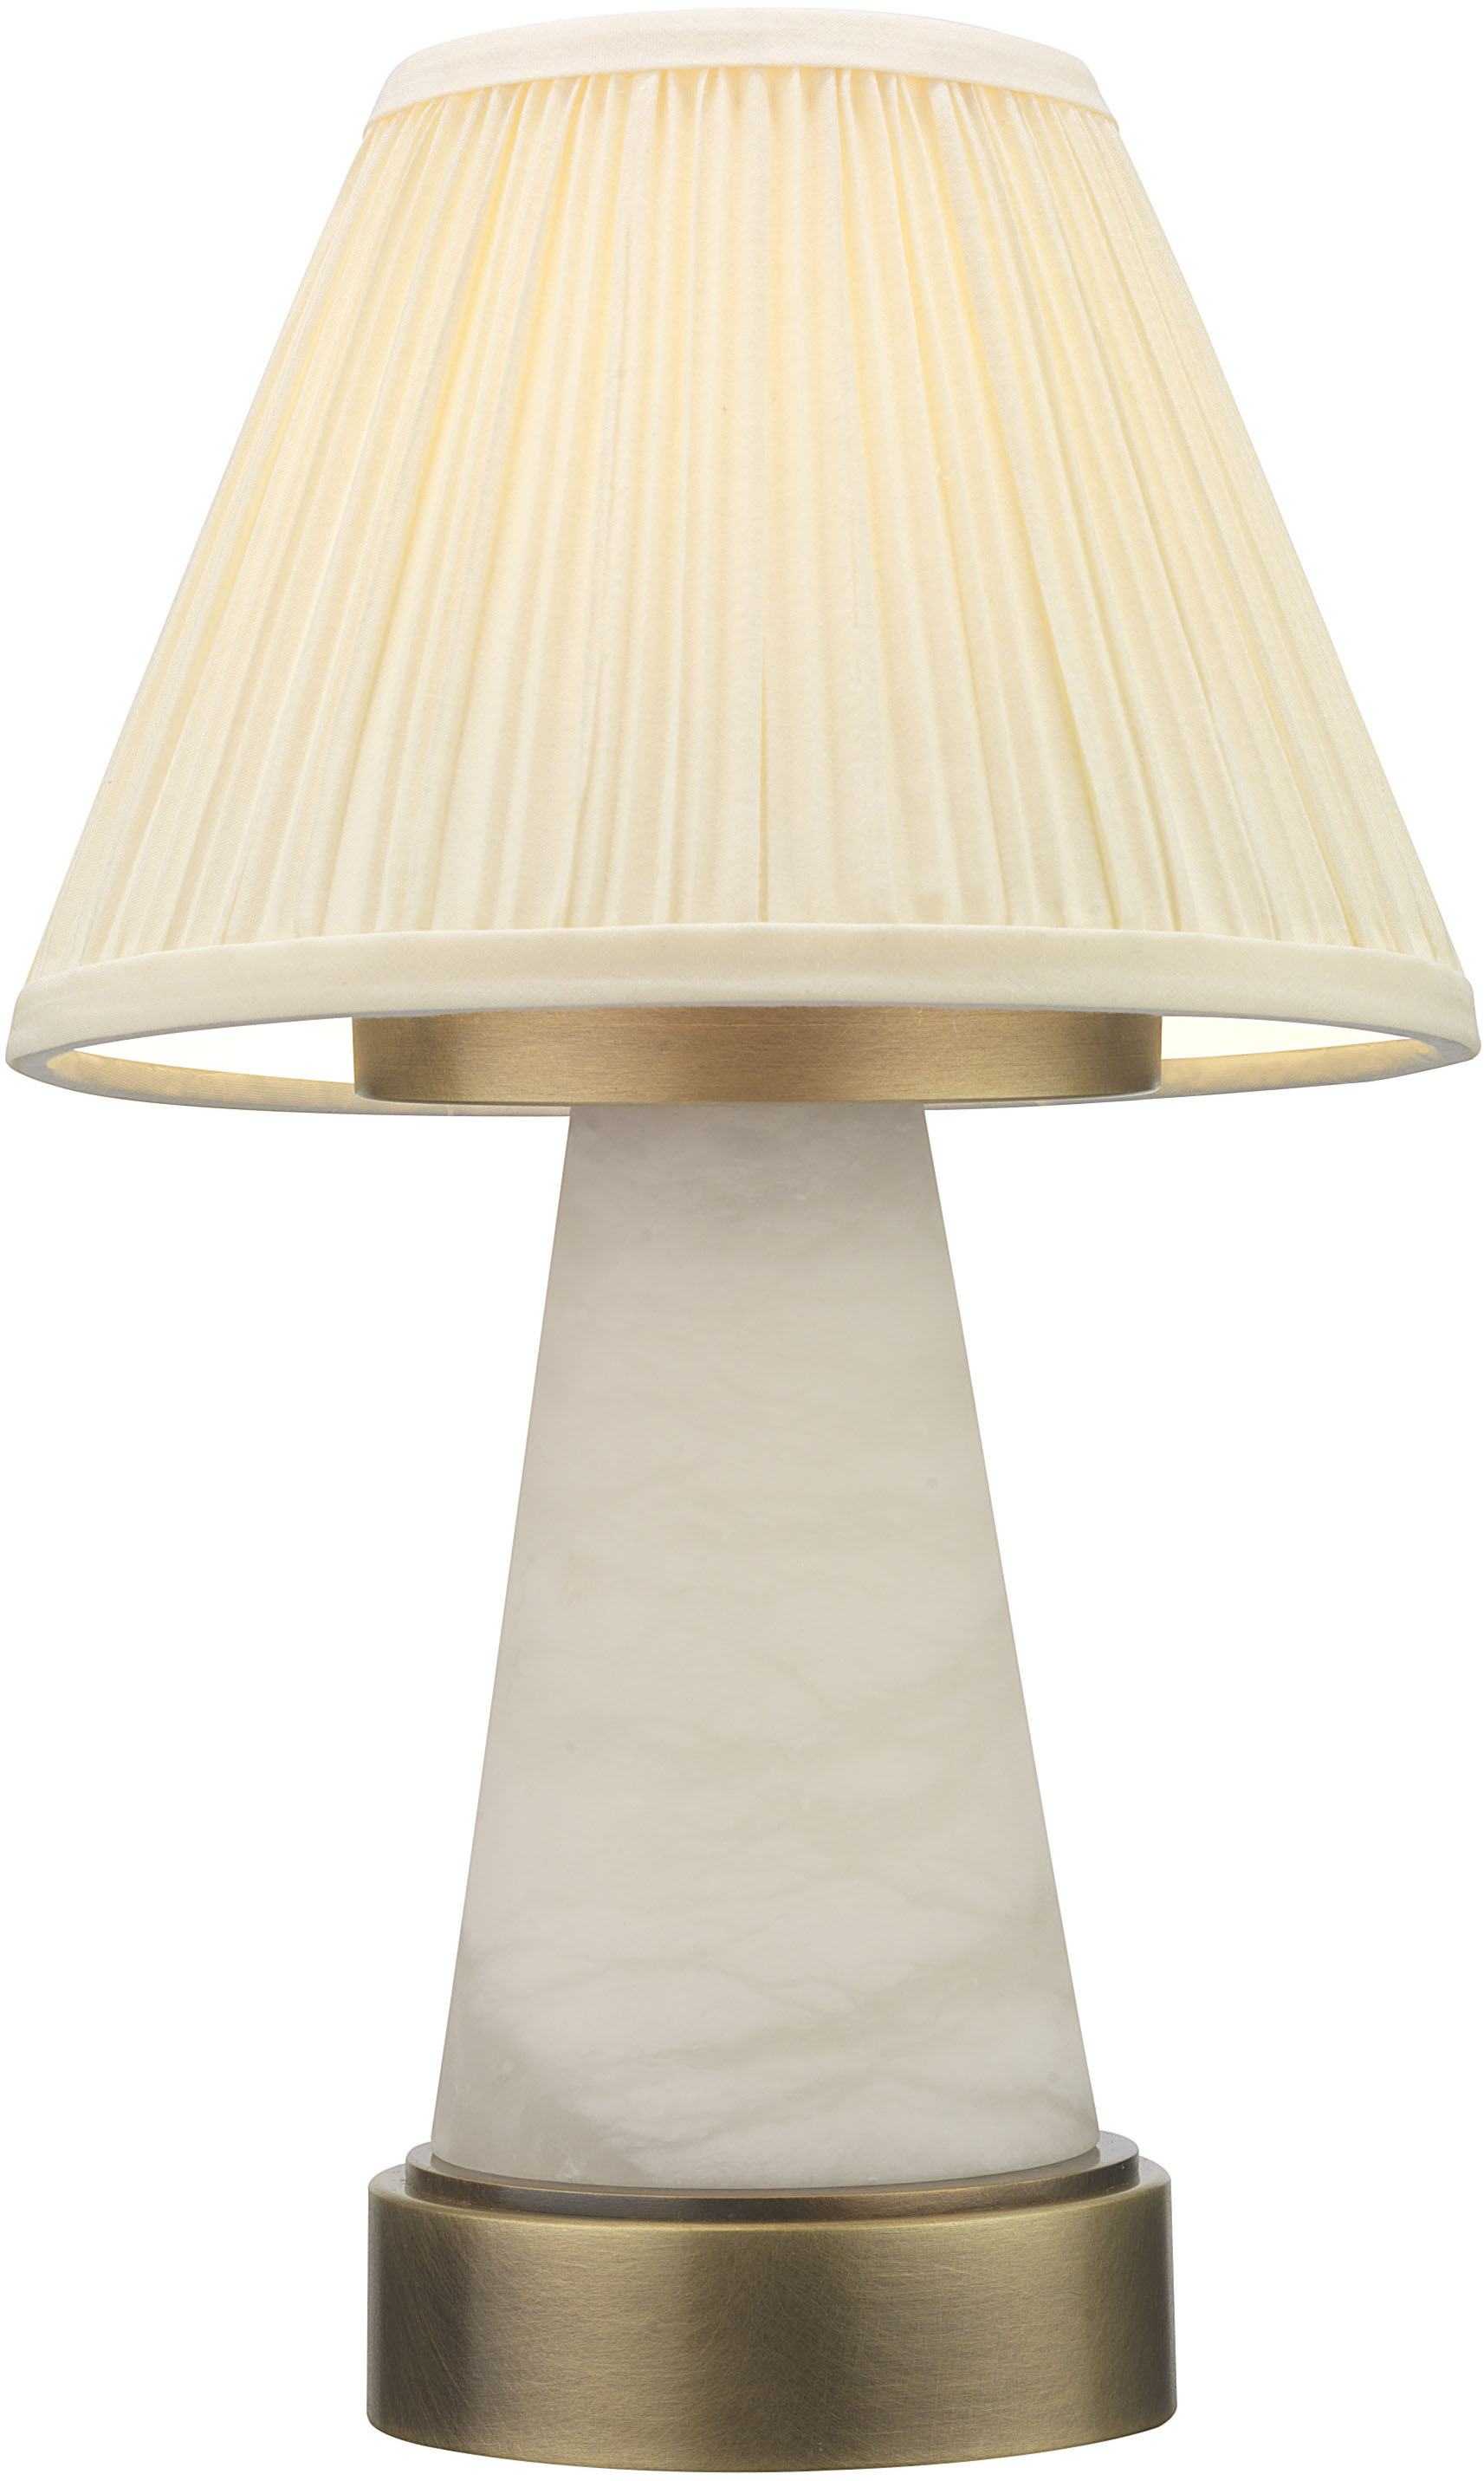 The Sarina rechargeable table light features an alabaster body and brass base detailing.